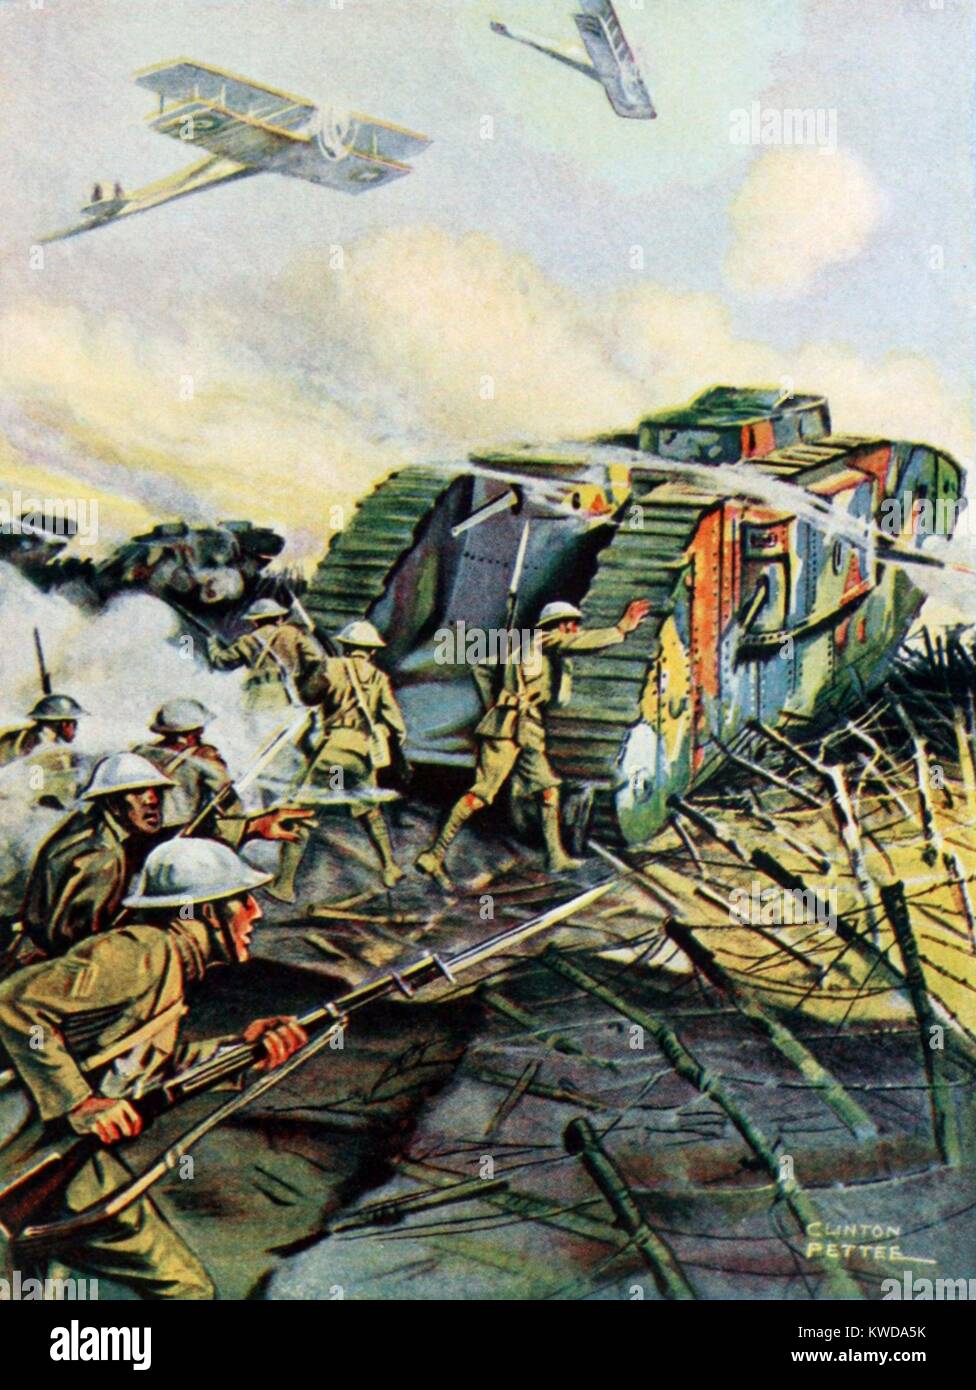 World War 1 Tanks. Illustration of a British tank in battle, crushing German barbed wire defenses, and sheltering British soldiers following. In the air are British military bi-planes. Ca. 1918. (BSLOC 2013 1 164) Stock Photo